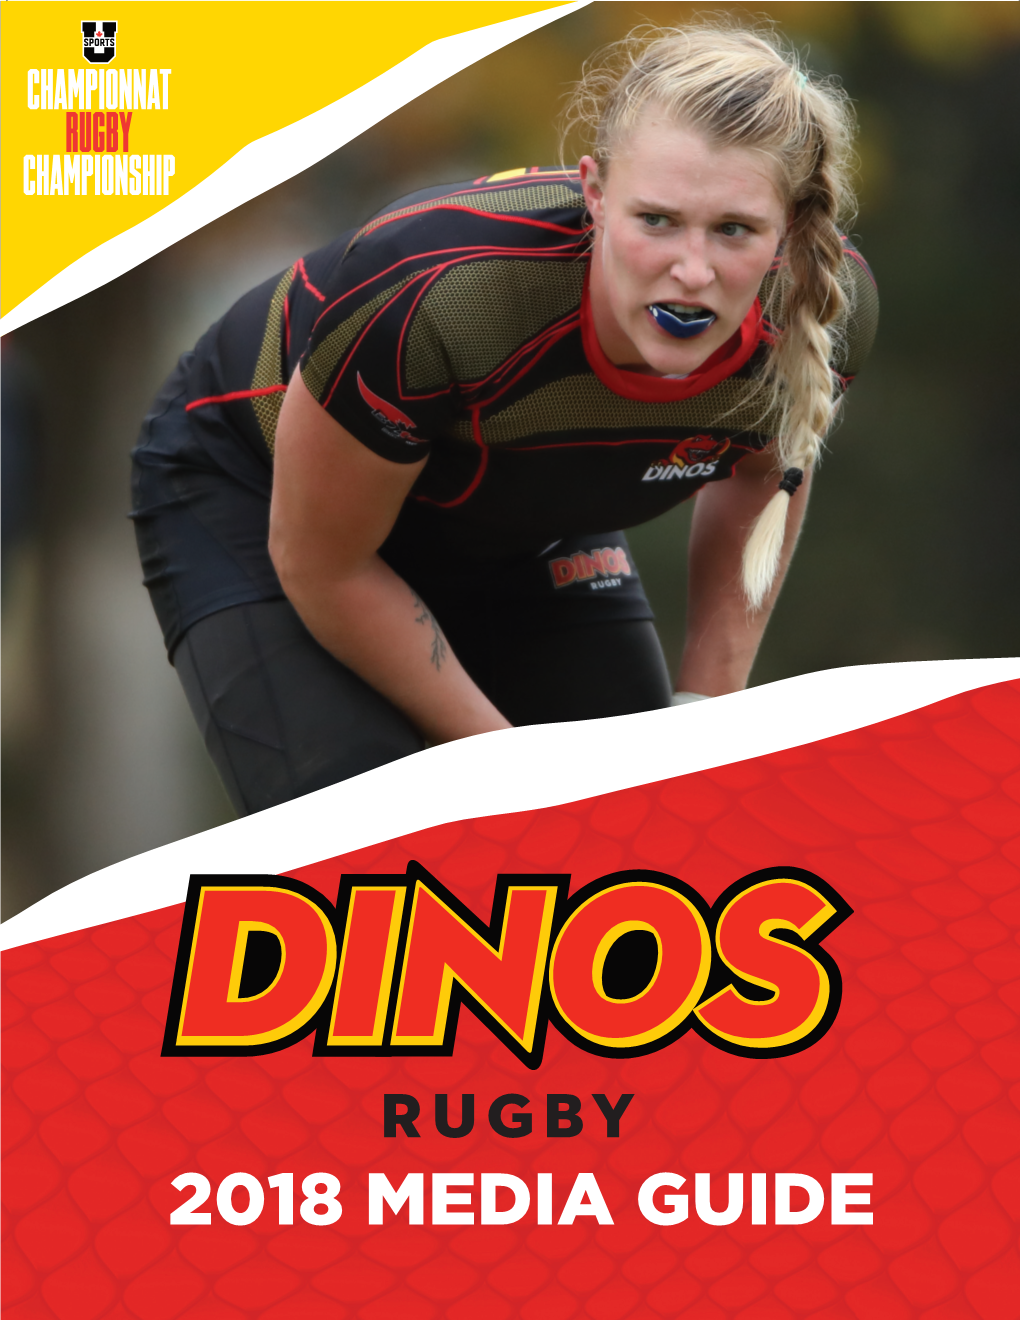 2018 MEDIA GUIDE 2018 DINOS WOMEN’S RUGBY SCHEDULE, RESULTS & SCORING MEDIA GUIDE KASSELLE MENIN QUICK FACTS LOCK & INFORMATION: Arts